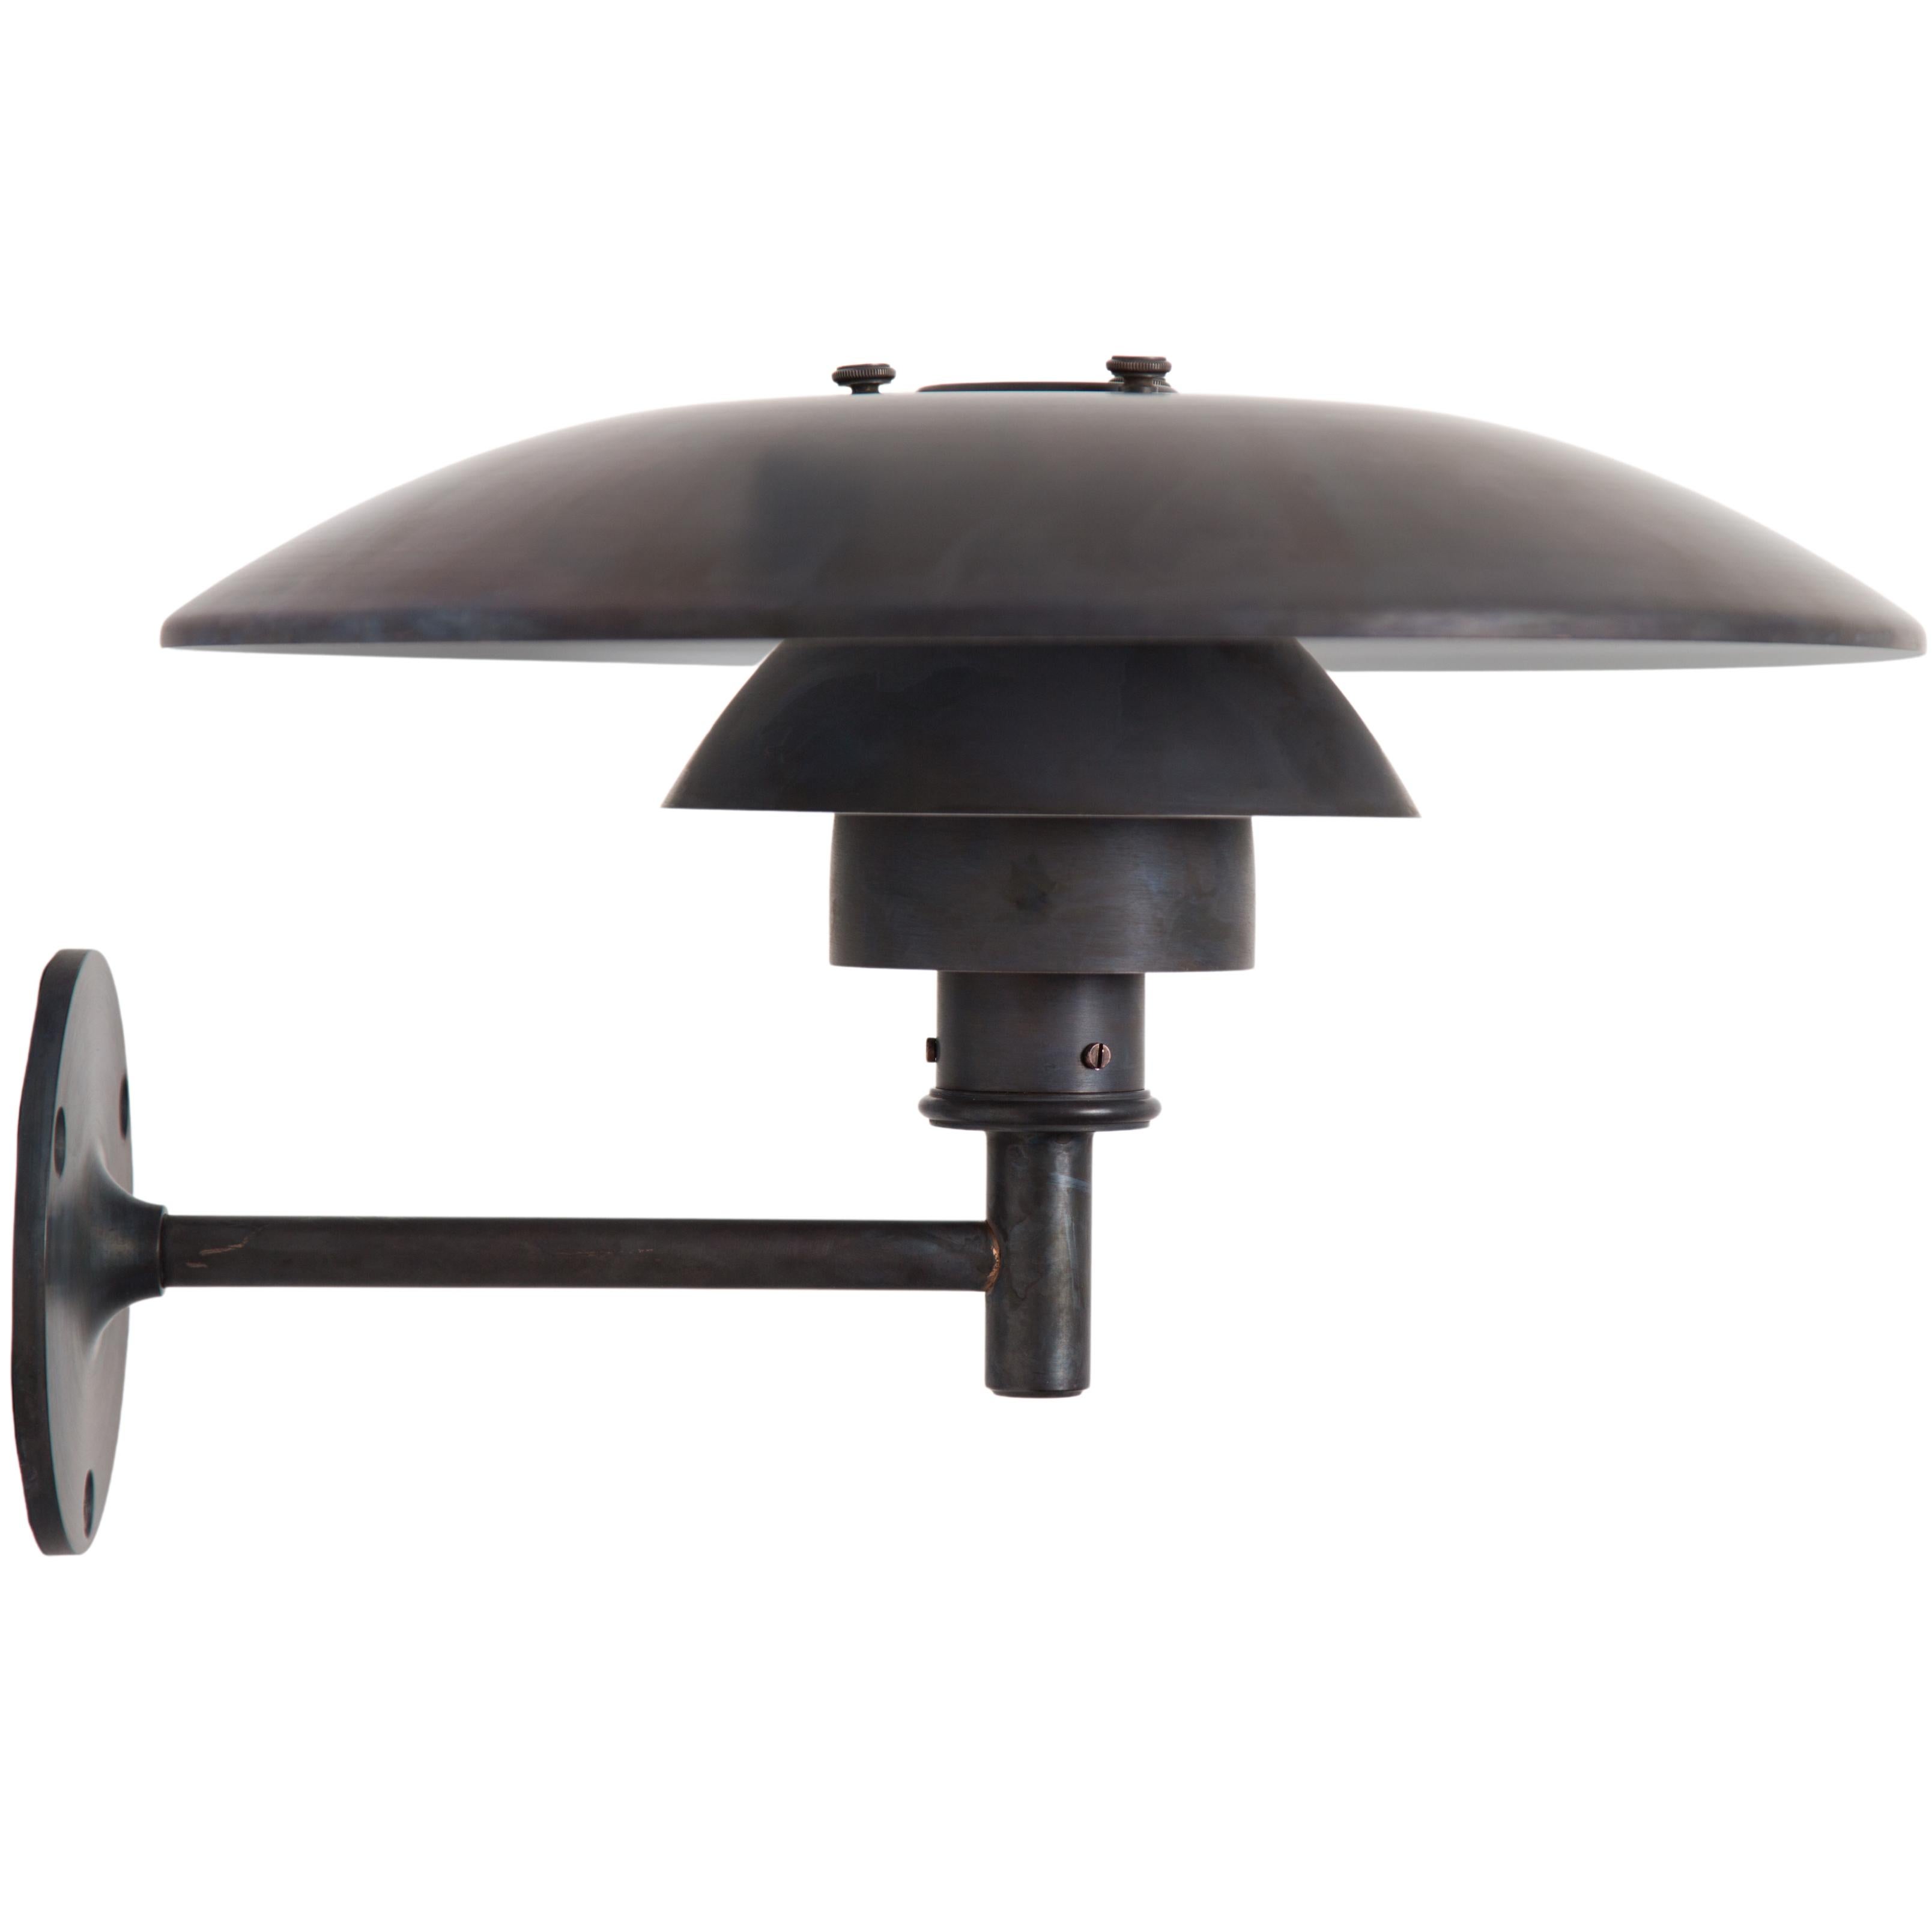 Pair of Poul Henningsen Ph Wall Darkly Patinated Outdoor Lamps for Louis Poulsen For Sale 9